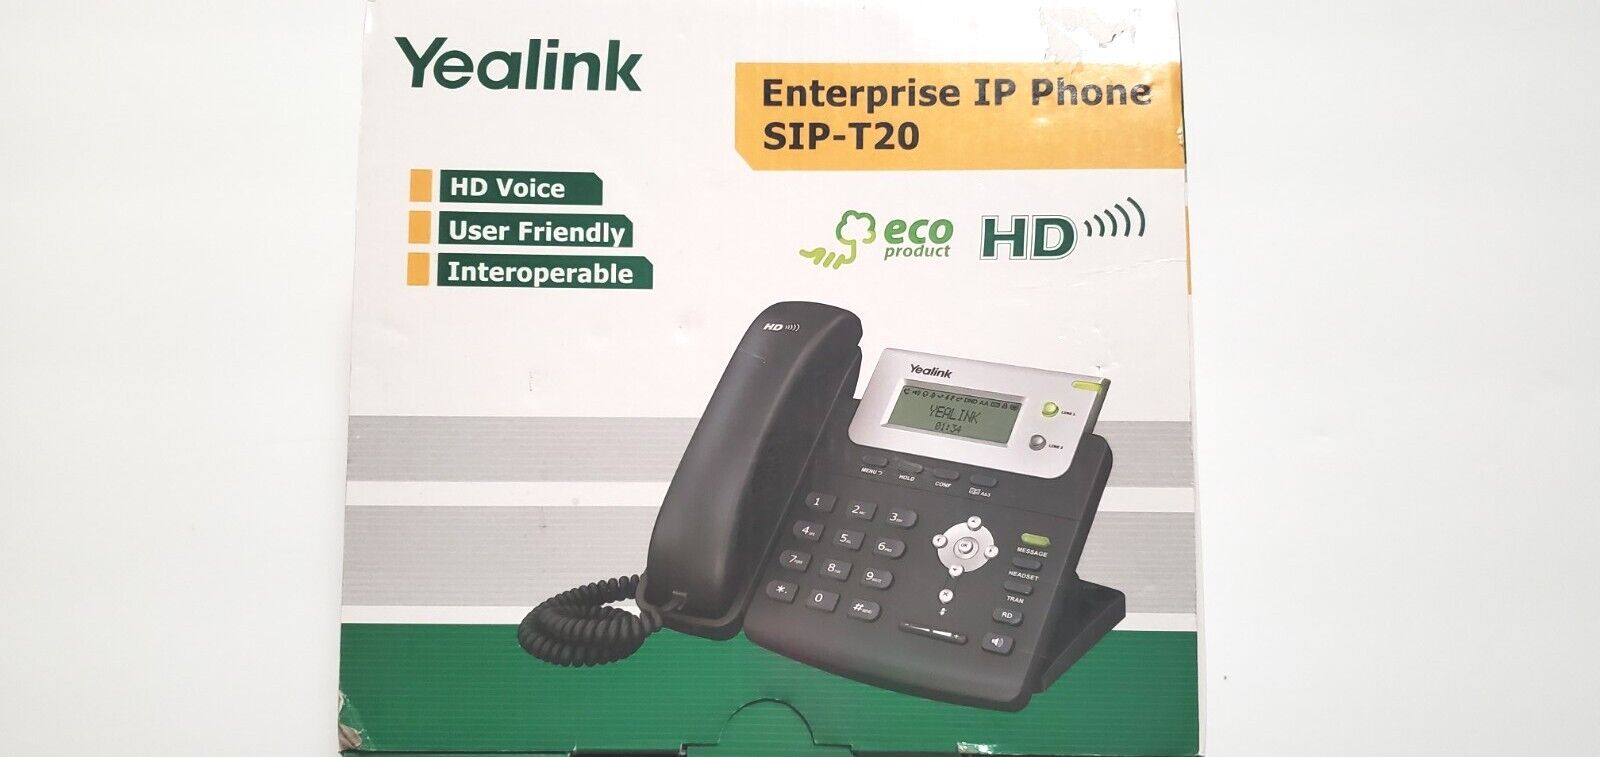 New Yealink Enterprise IP SIP-T20 VoIP Phone HD Voice Interoperable Eco Product